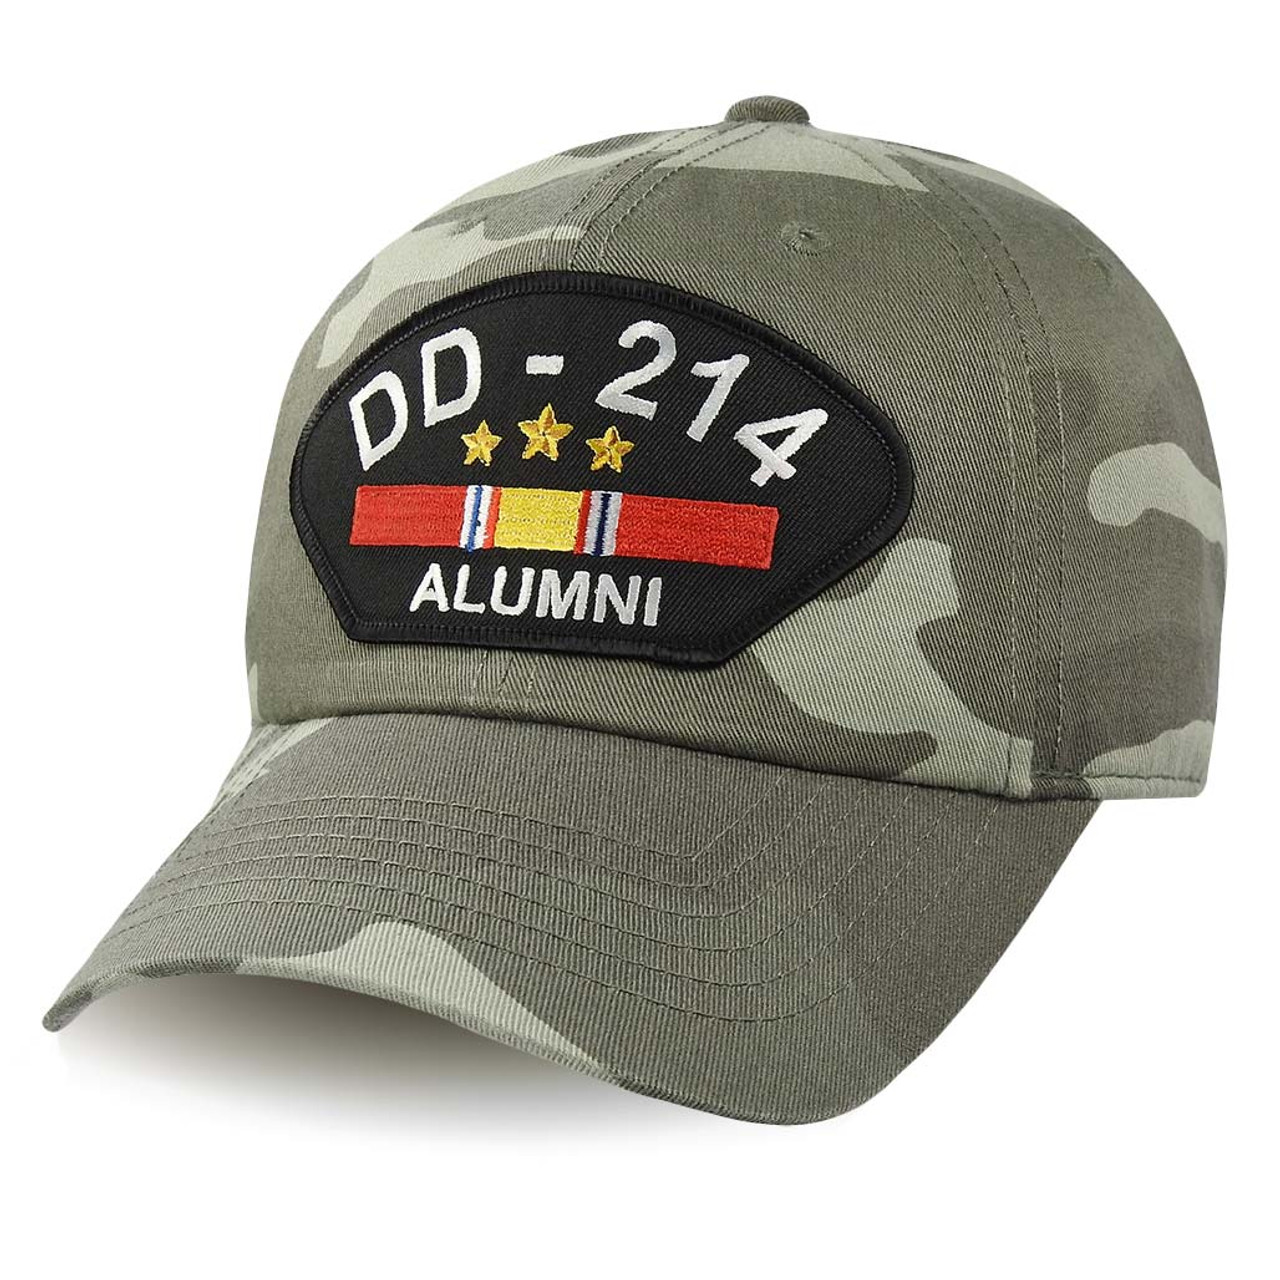 DD-214 Alumni and National Service Ribbon Hat on Urban Camo Hat military army navy marines air force